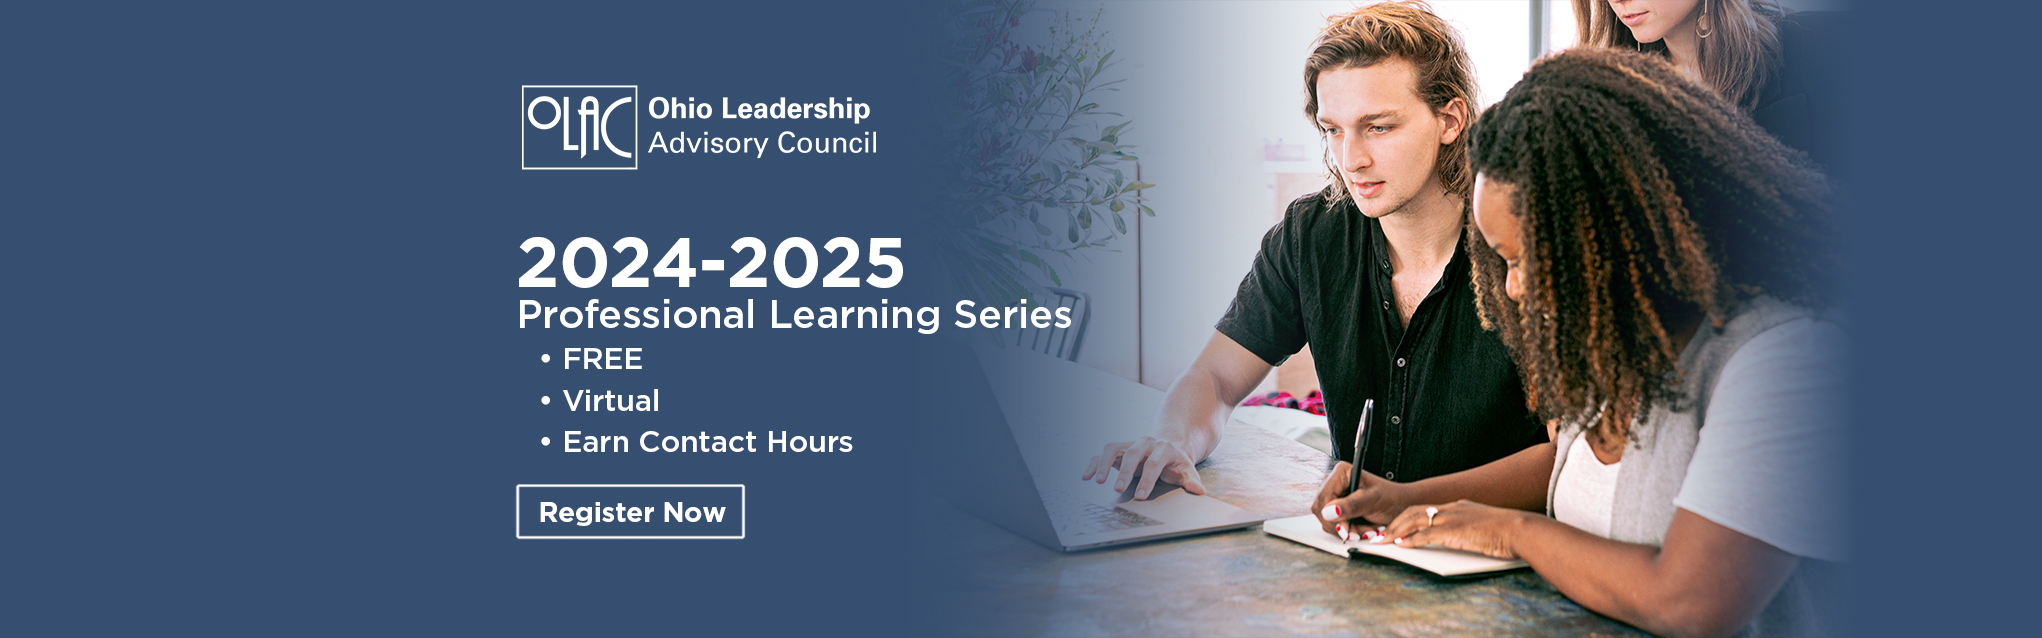 2024-2025 Professional Learning Series